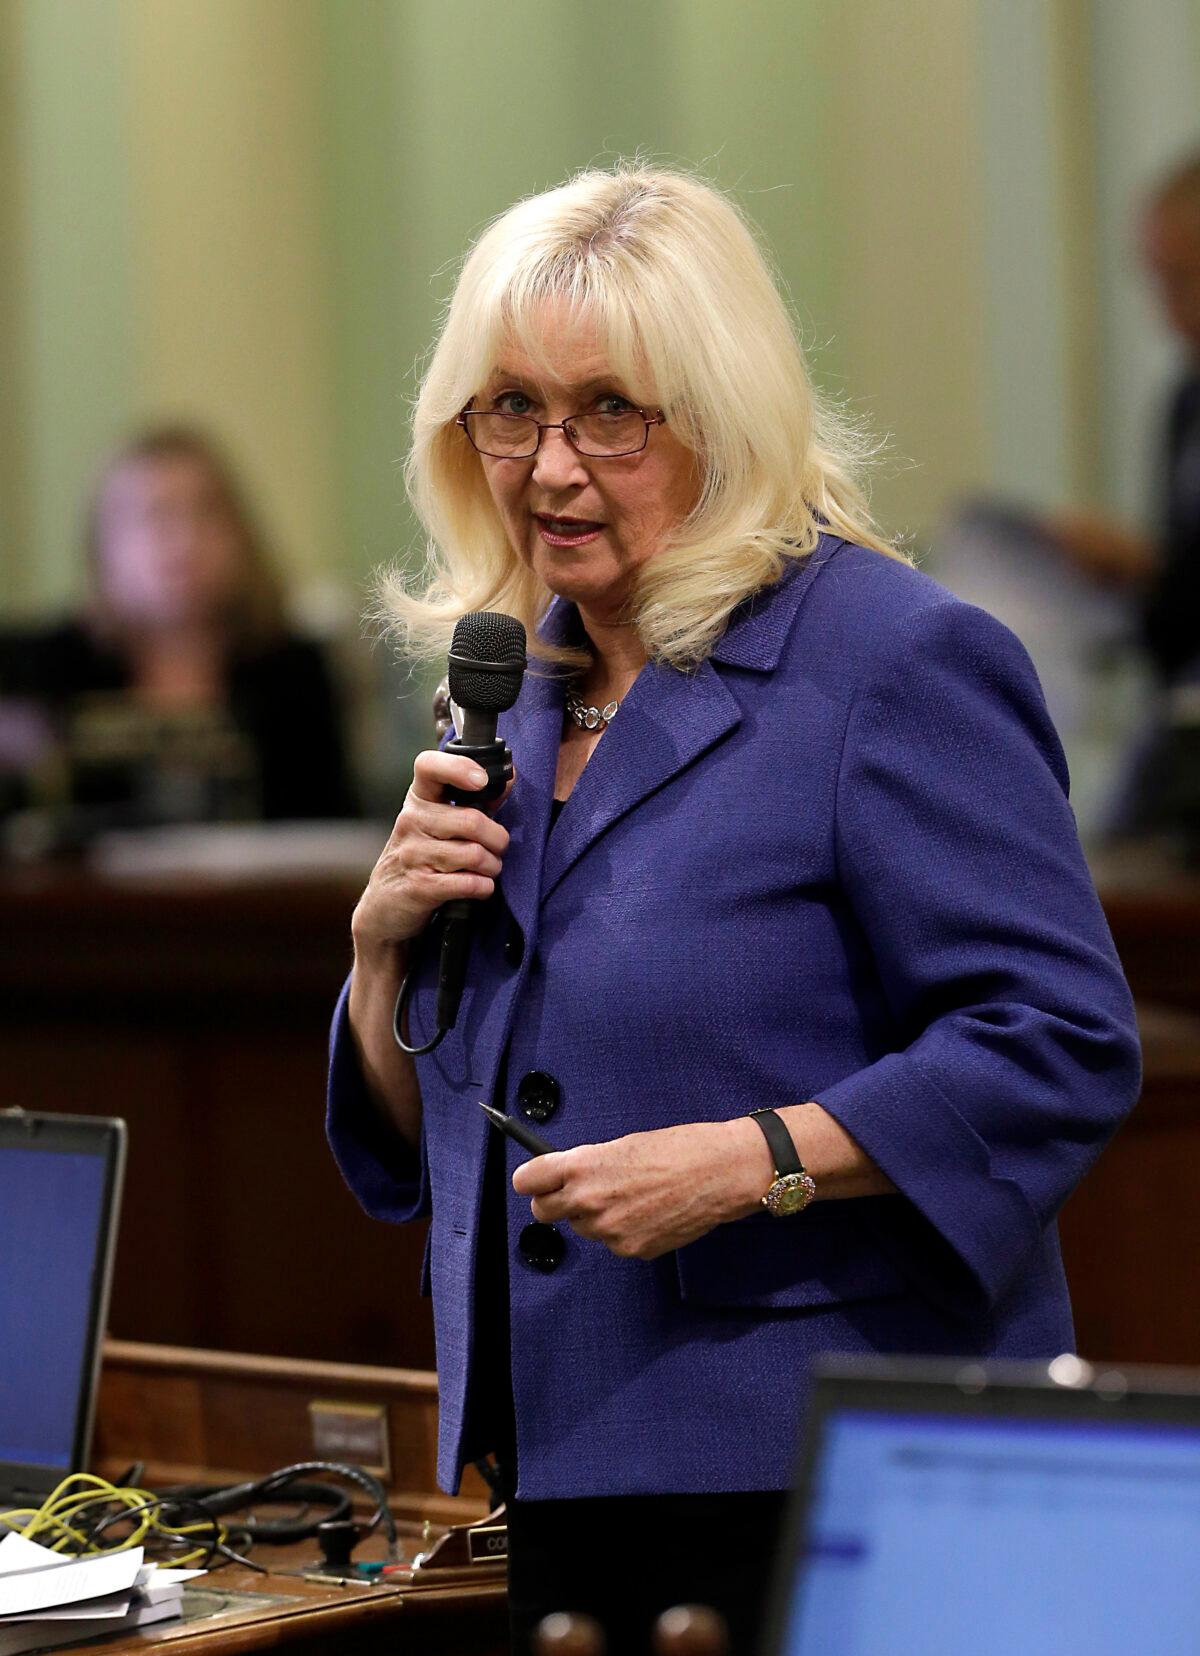  California Assembly Minority Leader Connie Conway speaks in Sacramento, Calif., in a 2014 file photograph. (Rich Pedroncelli/AP Photo)